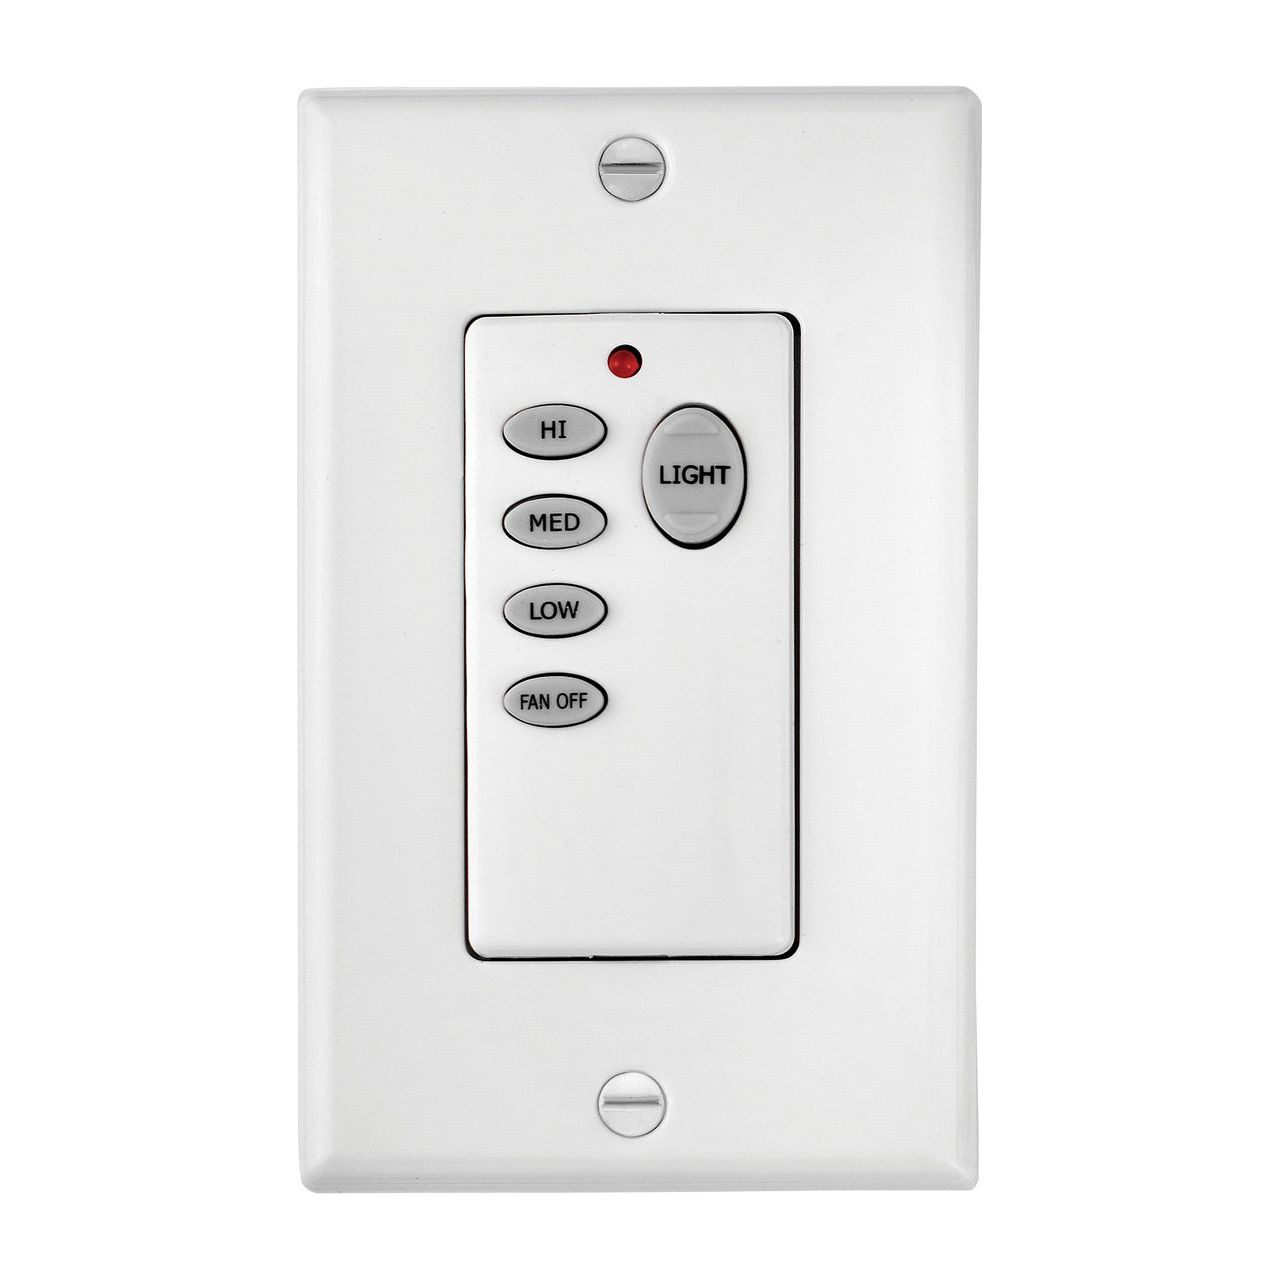 Hinkley Canada - 980030FWH - Wall Contol - Wall Control 3 Speed - White